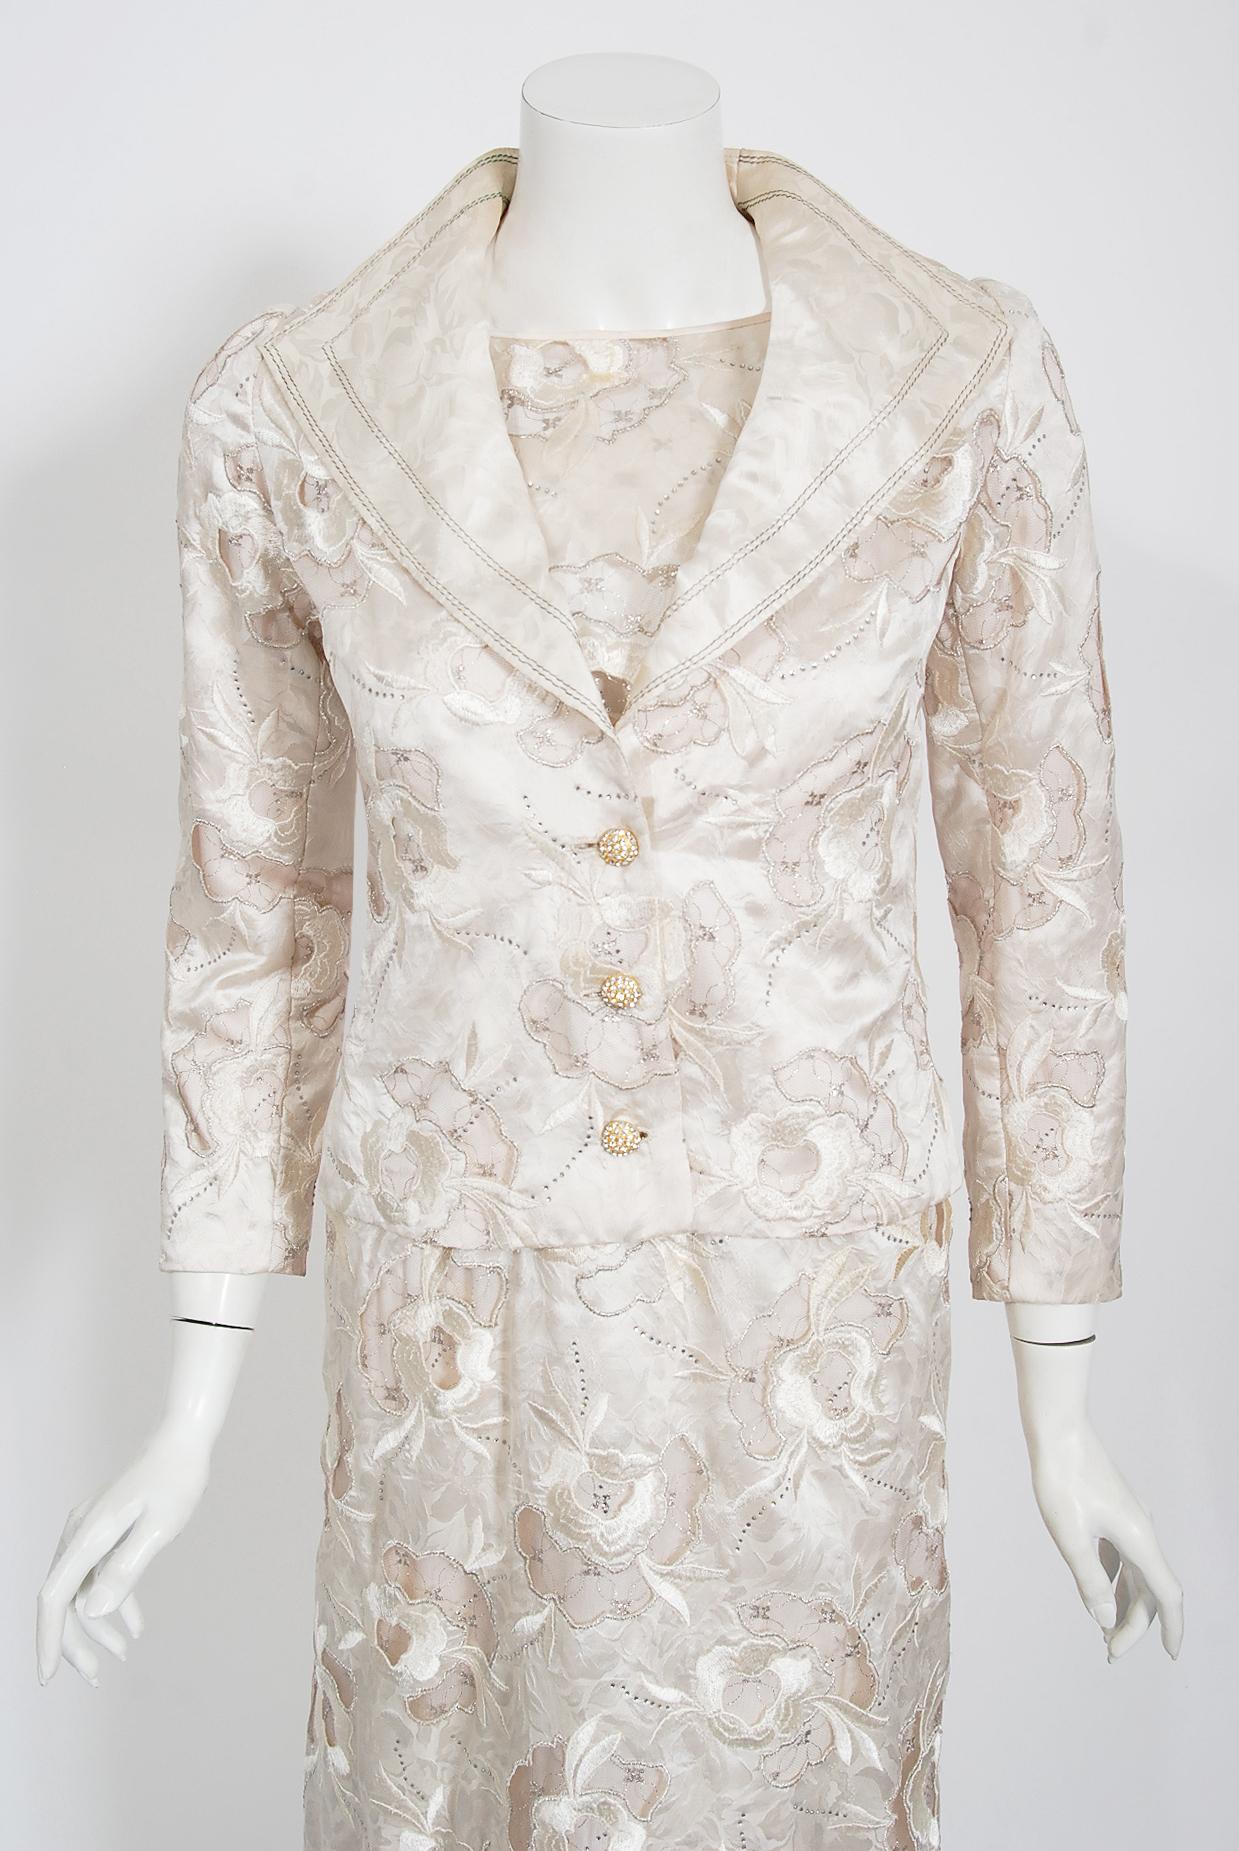 Women's Vintage Chanel Haute Couture Ivory Lesage Embroidered Silk Bridal Gown & Jacket For Sale